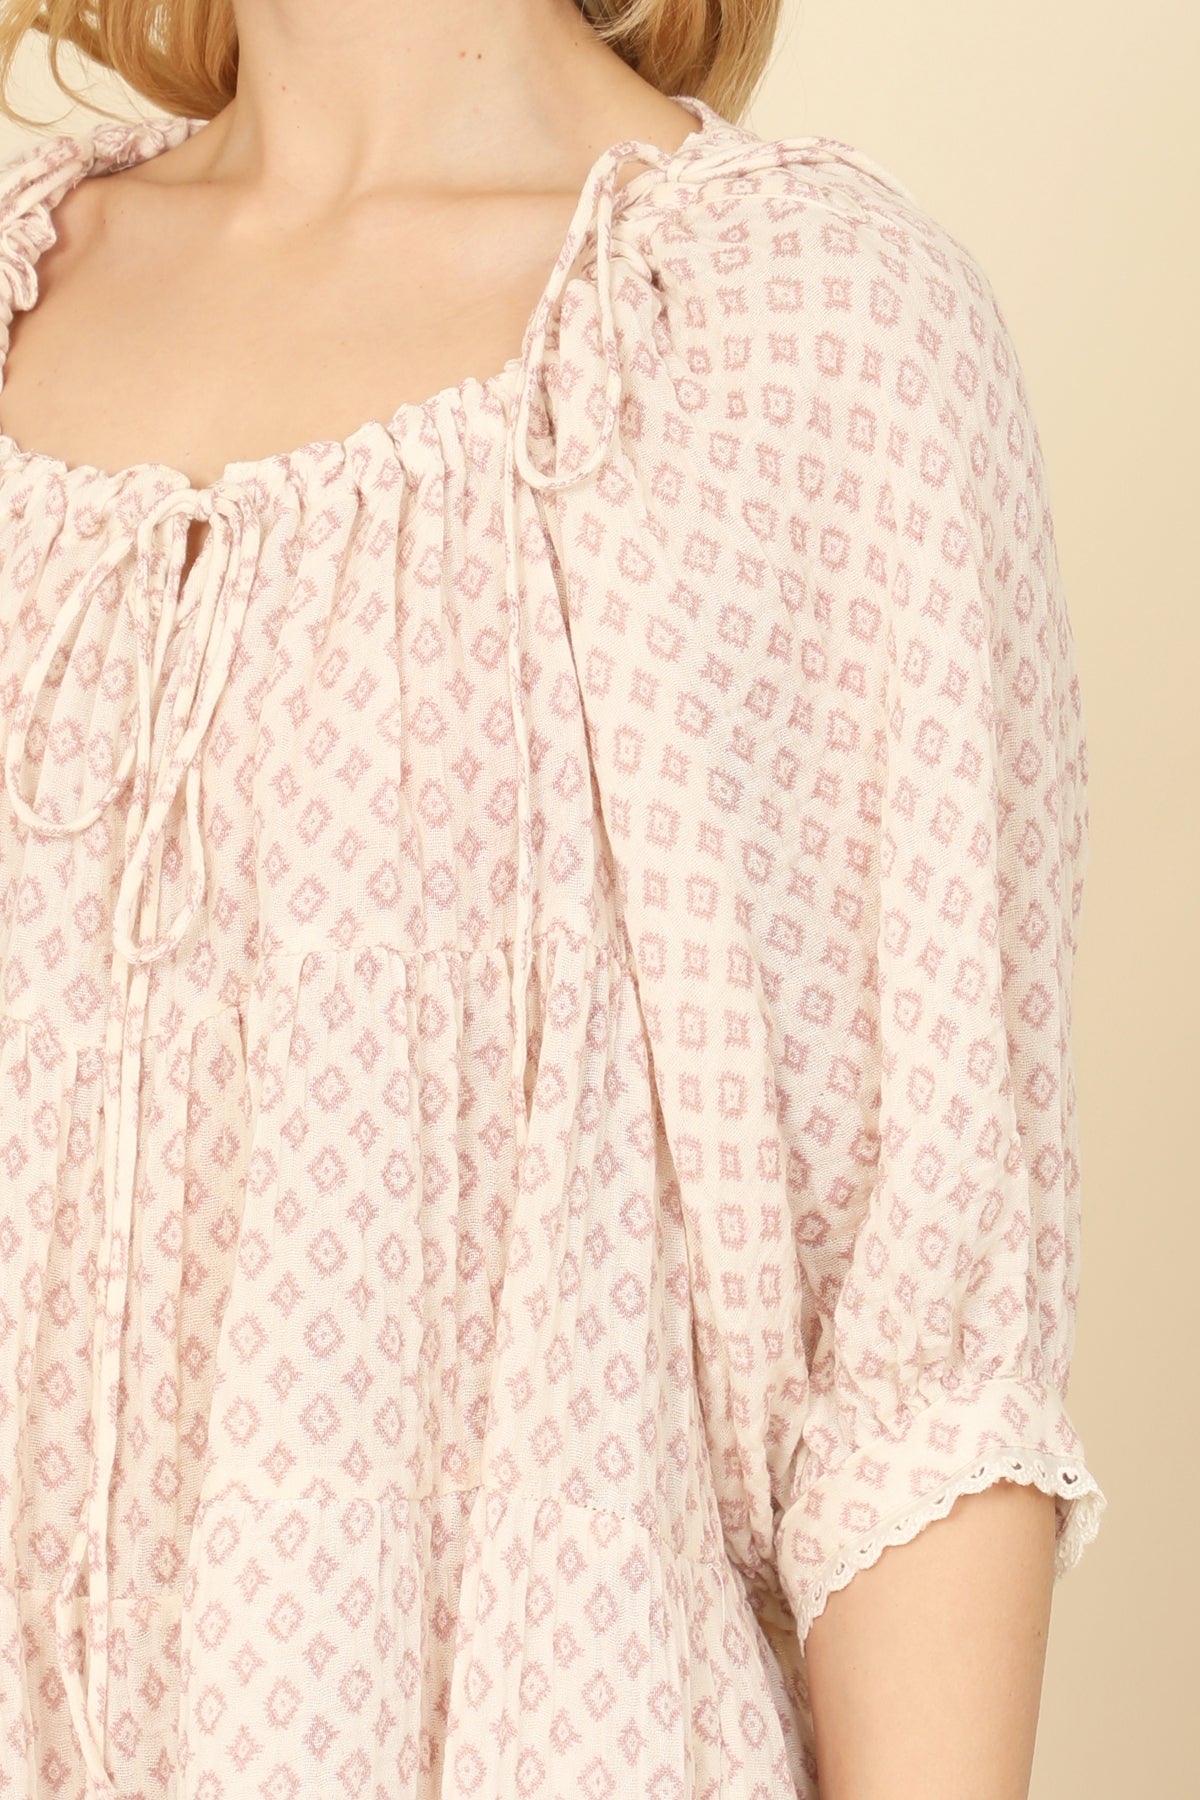 MAUVE CREAM PRINTED HALF PUFF SLEEVE BABYDOLL DRESS 2-2-1 (NOW $5.75 ONLY!)